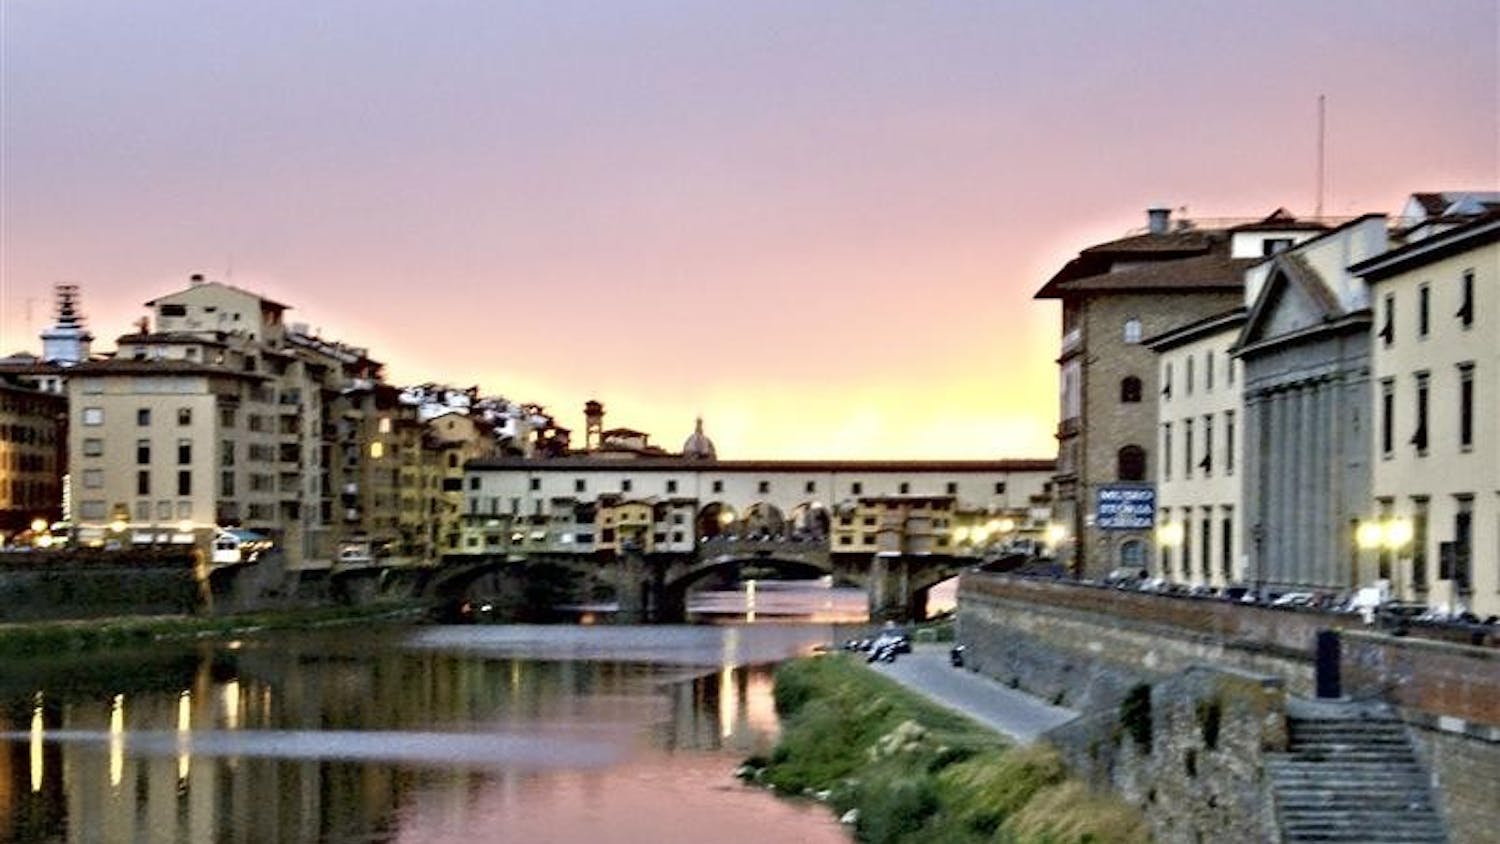 Florence’s oldest bridge, the Ponte Vecchio, at sunset May 17. The bridge, completed in 1345, it was the only bridge across the River Arno to survive German bombing during World War II.